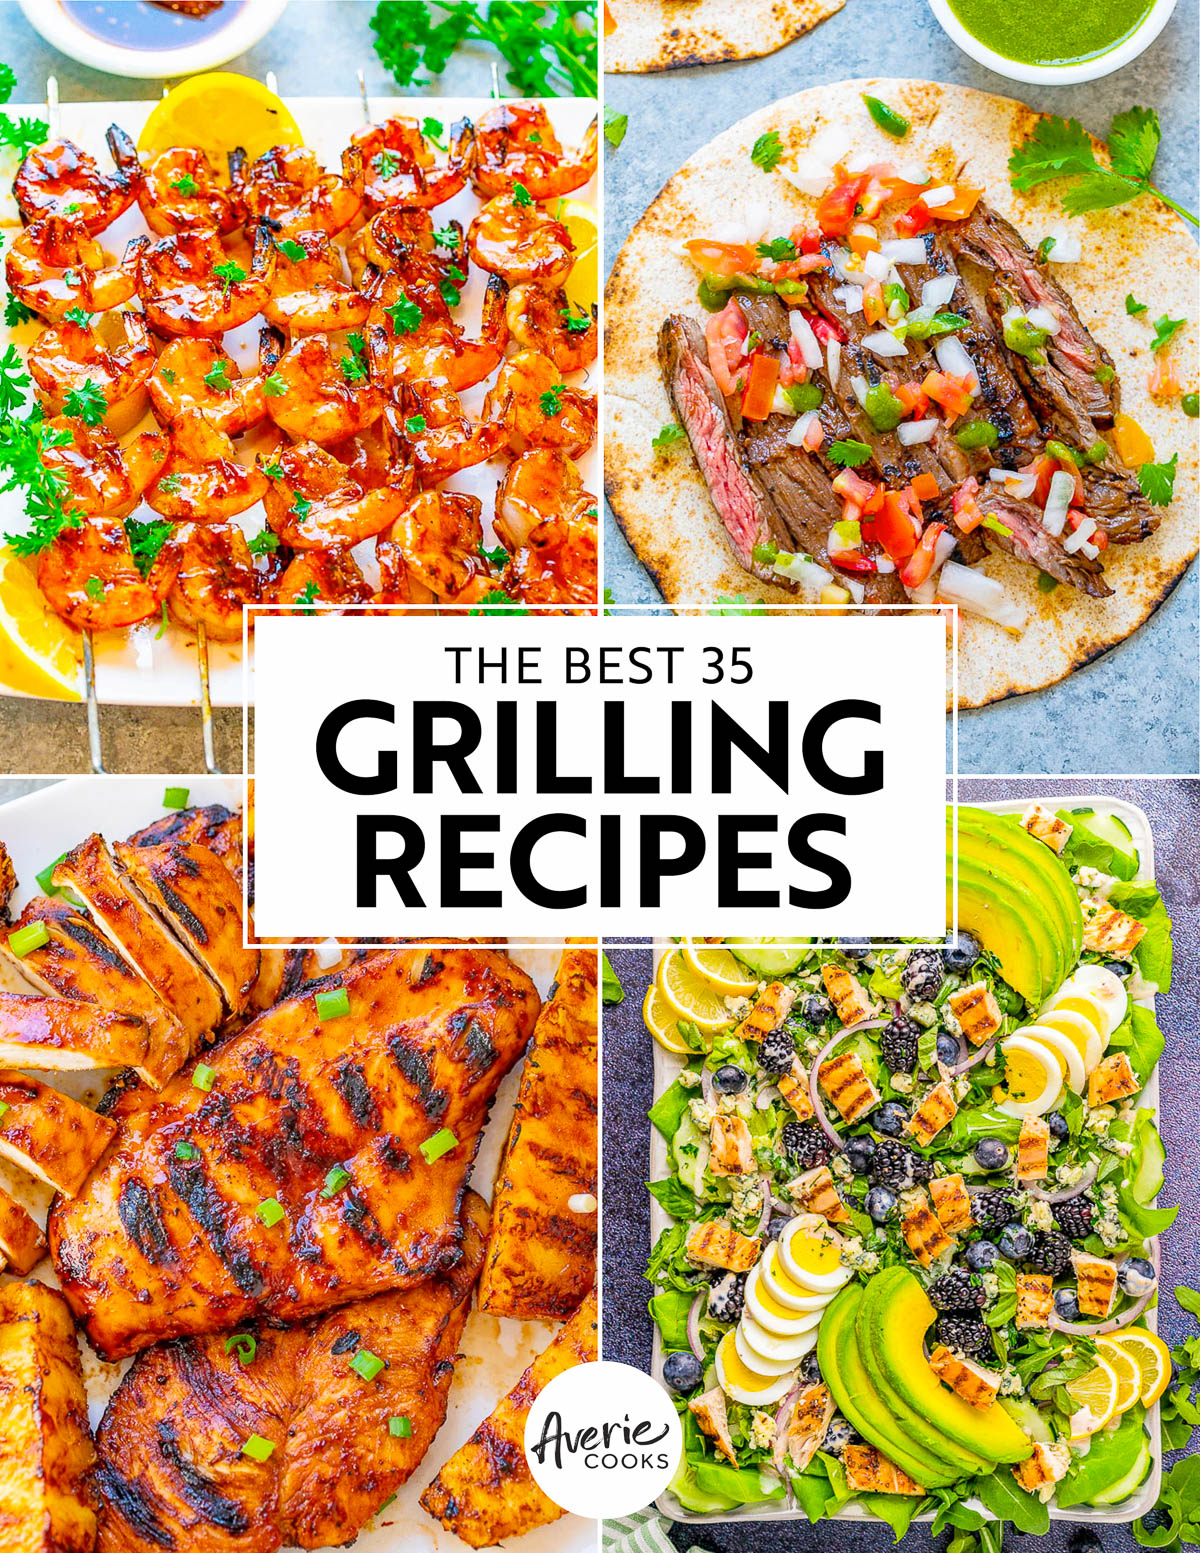 A collage with grilled shrimp, steak tacos, chicken breasts, and a salad. The text reads "The Best 35 Grilling Recipes - Averie Cooks.